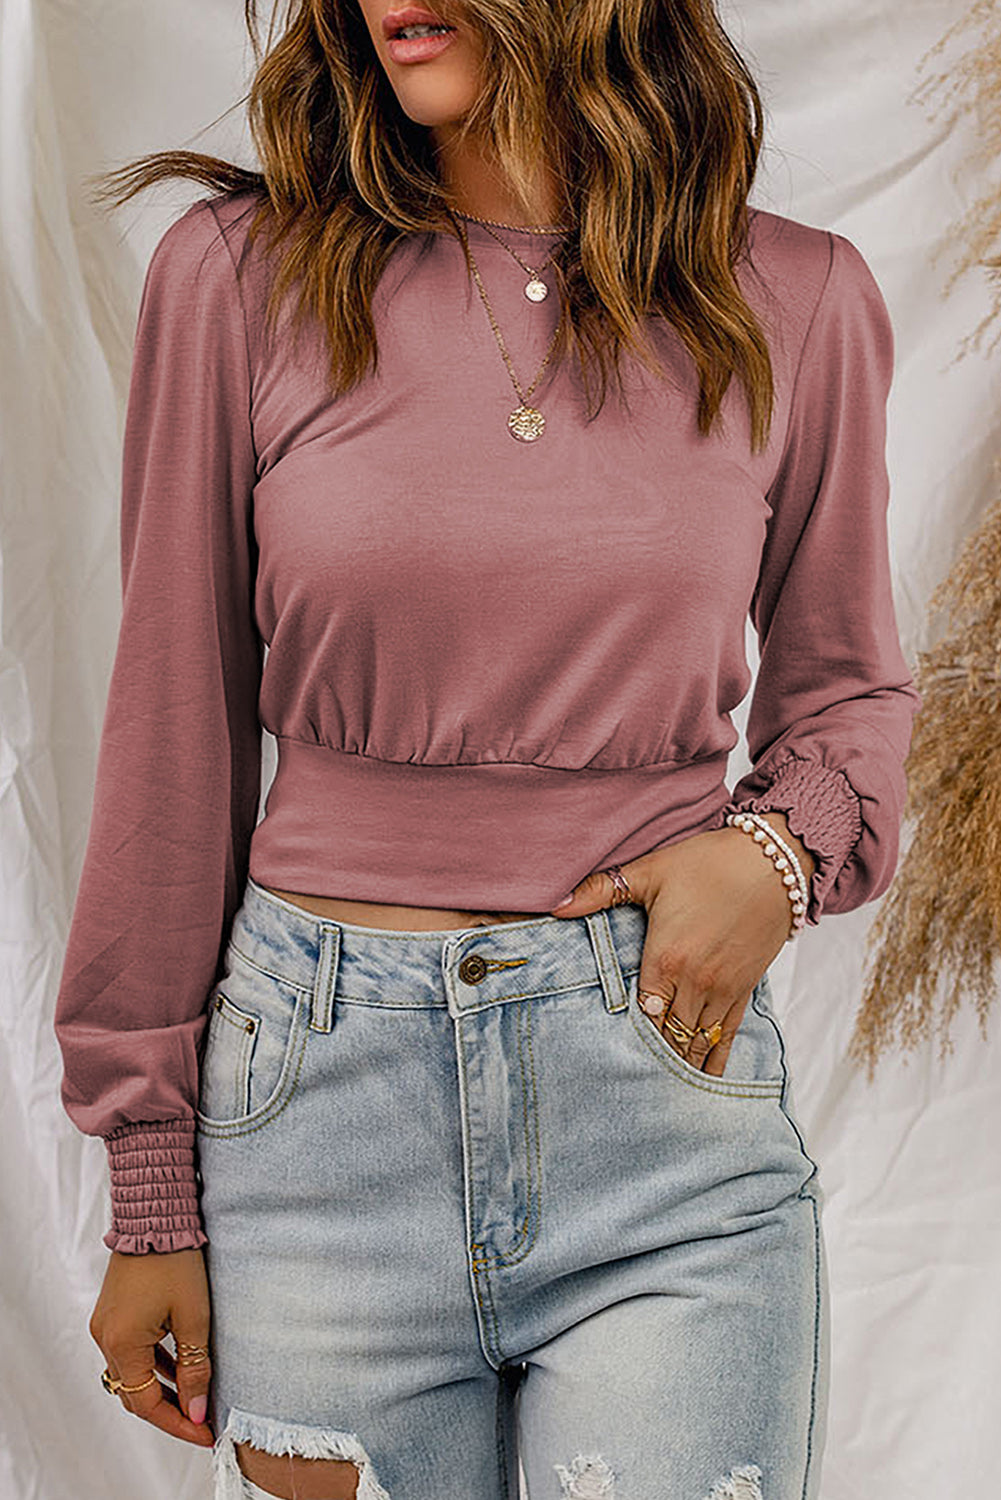 Girls Night Out Pink Top